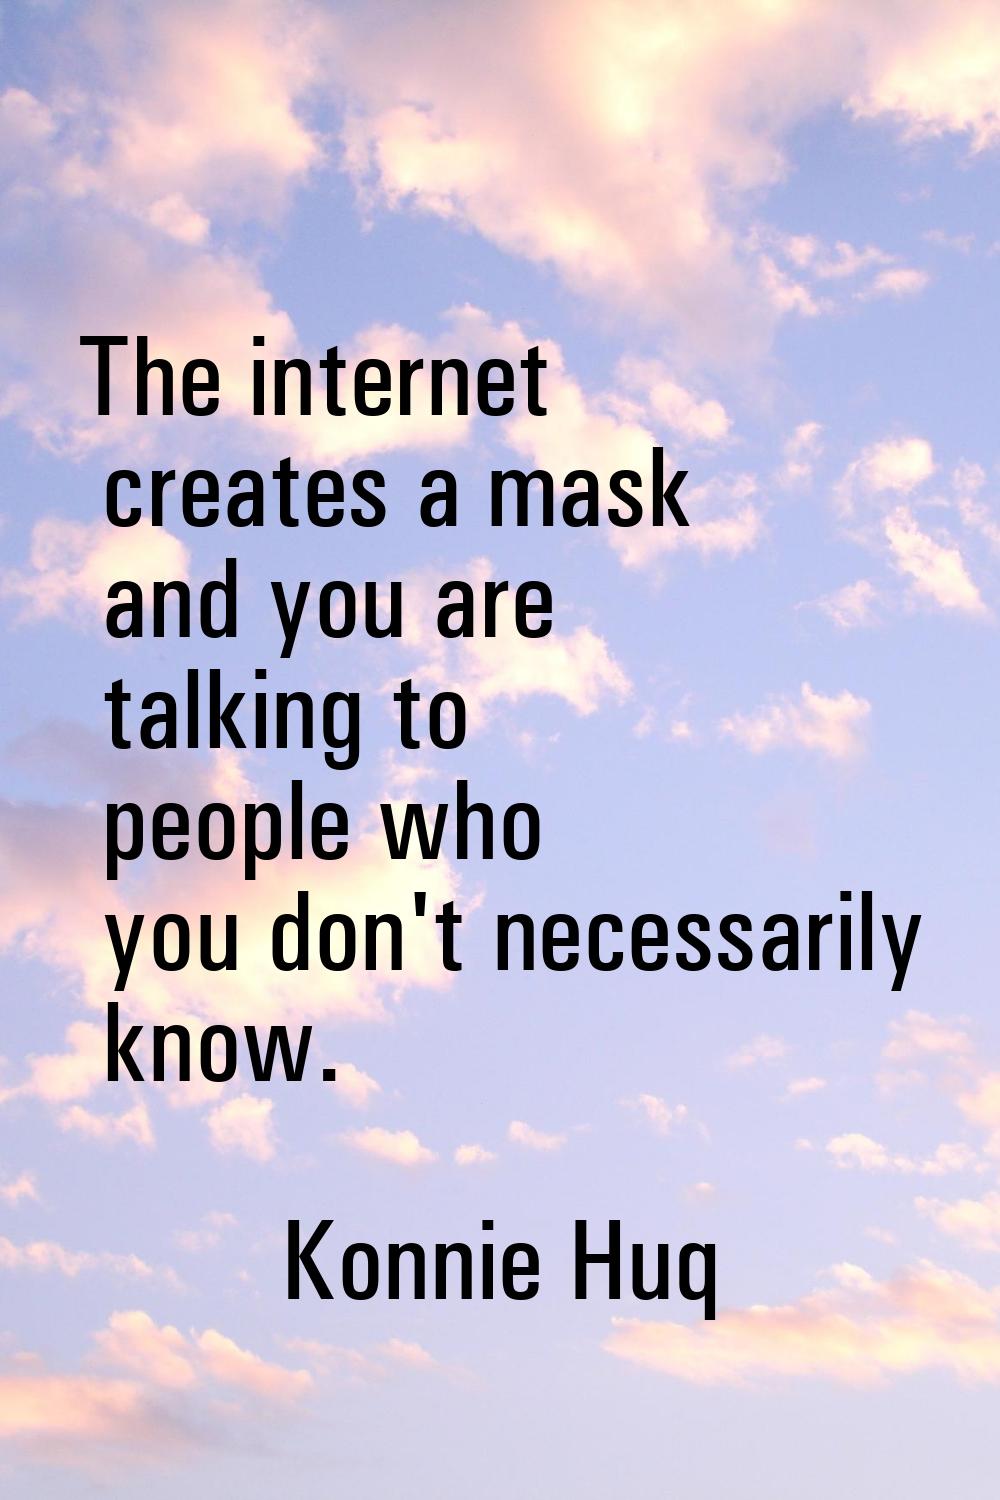 The internet creates a mask and you are talking to people who you don't necessarily know.